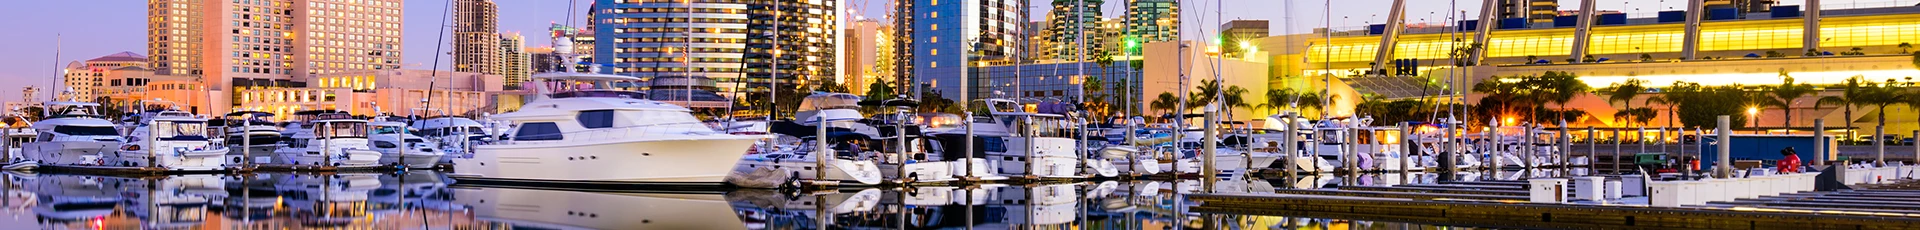 Boat Removal, Dismantle and Disposal in Cross City Florida